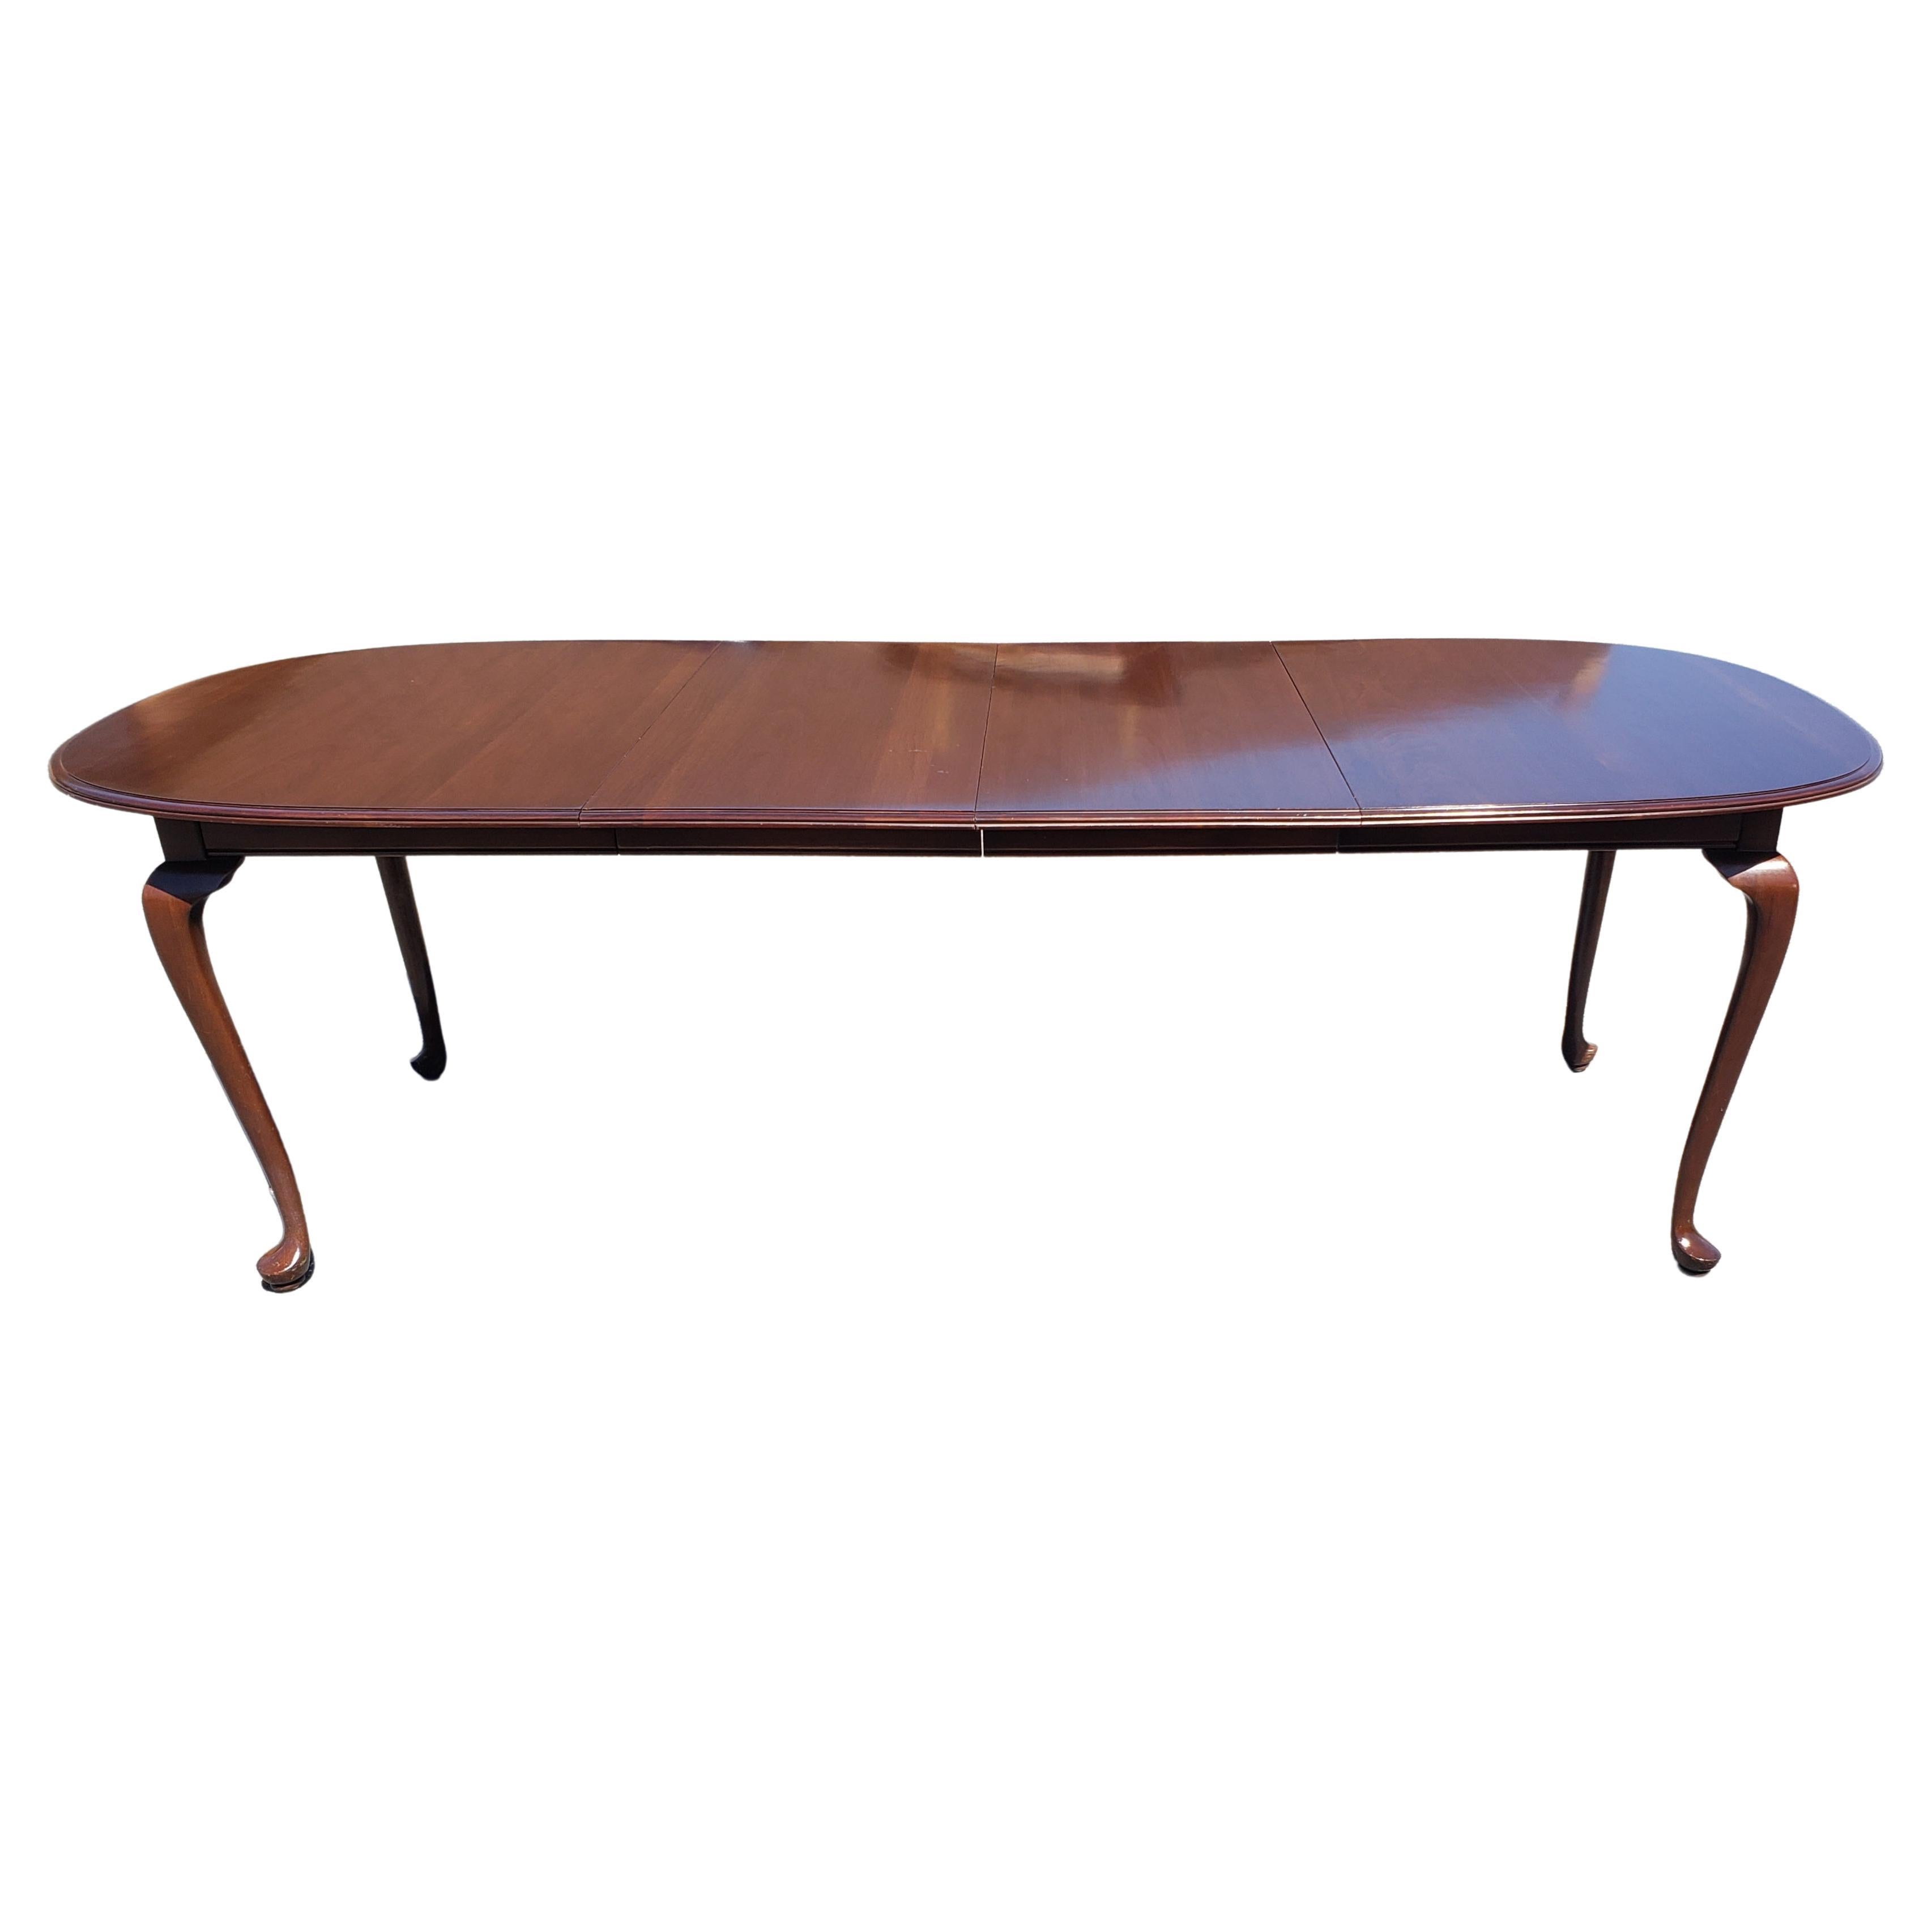 20th Century Ethan Allen Solid Cherry Extension Dining Room Table